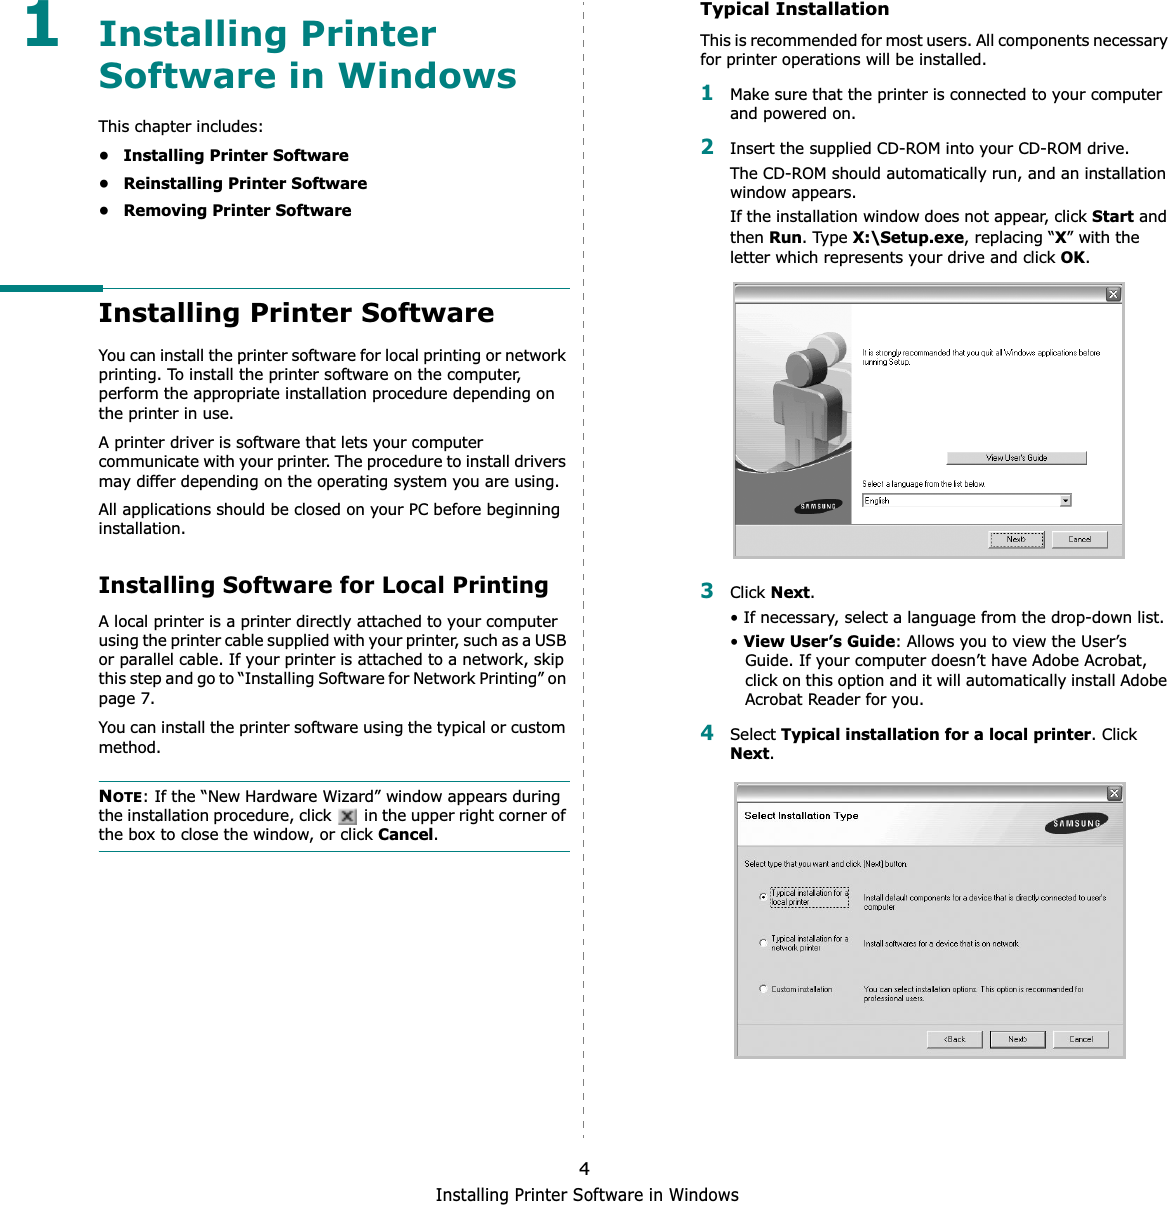 Installing Printer Software in Windows41Installing Printer Software in WindowsThis chapter includes:• Installing Printer Software• Reinstalling Printer Software•Removing Printer SoftwareInstalling Printer SoftwareYou can install the printer software for local printing or network printing. To install the printer software on the computer, perform the appropriate installation procedure depending on the printer in use.A printer driver is software that lets your computer communicate with your printer. The procedure to install drivers may differ depending on the operating system you are using.All applications should be closed on your PC before beginning installation. Installing Software for Local PrintingA local printer is a printer directly attached to your computer using the printer cable supplied with your printer, such as a USB or parallel cable. If your printer is attached to a network, skip this step and go to “Installing Software for Network Printing” on page 7.You can install the printer software using the typical or custom method.NOTE: If the “New Hardware Wizard” window appears during the installation procedure, click   in the upper right corner of the box to close the window, or click Cancel.Typical InstallationThis is recommended for most users. All components necessary for printer operations will be installed.1Make sure that the printer is connected to your computer and powered on.2Insert the supplied CD-ROM into your CD-ROM drive.The CD-ROM should automatically run, and an installation window appears.If the installation window does not appear, click Start and then Run. Type X:\Setup.exe, replacing “X” with the letter which represents your drive and click OK.3Click Next.• If necessary, select a language from the drop-down list.•View User’s Guide: Allows you to view the User’s Guide. If your computer doesn’t have Adobe Acrobat, click on this option and it will automatically install Adobe Acrobat Reader for you.4Select Typical installation for a local printer. Click Next.